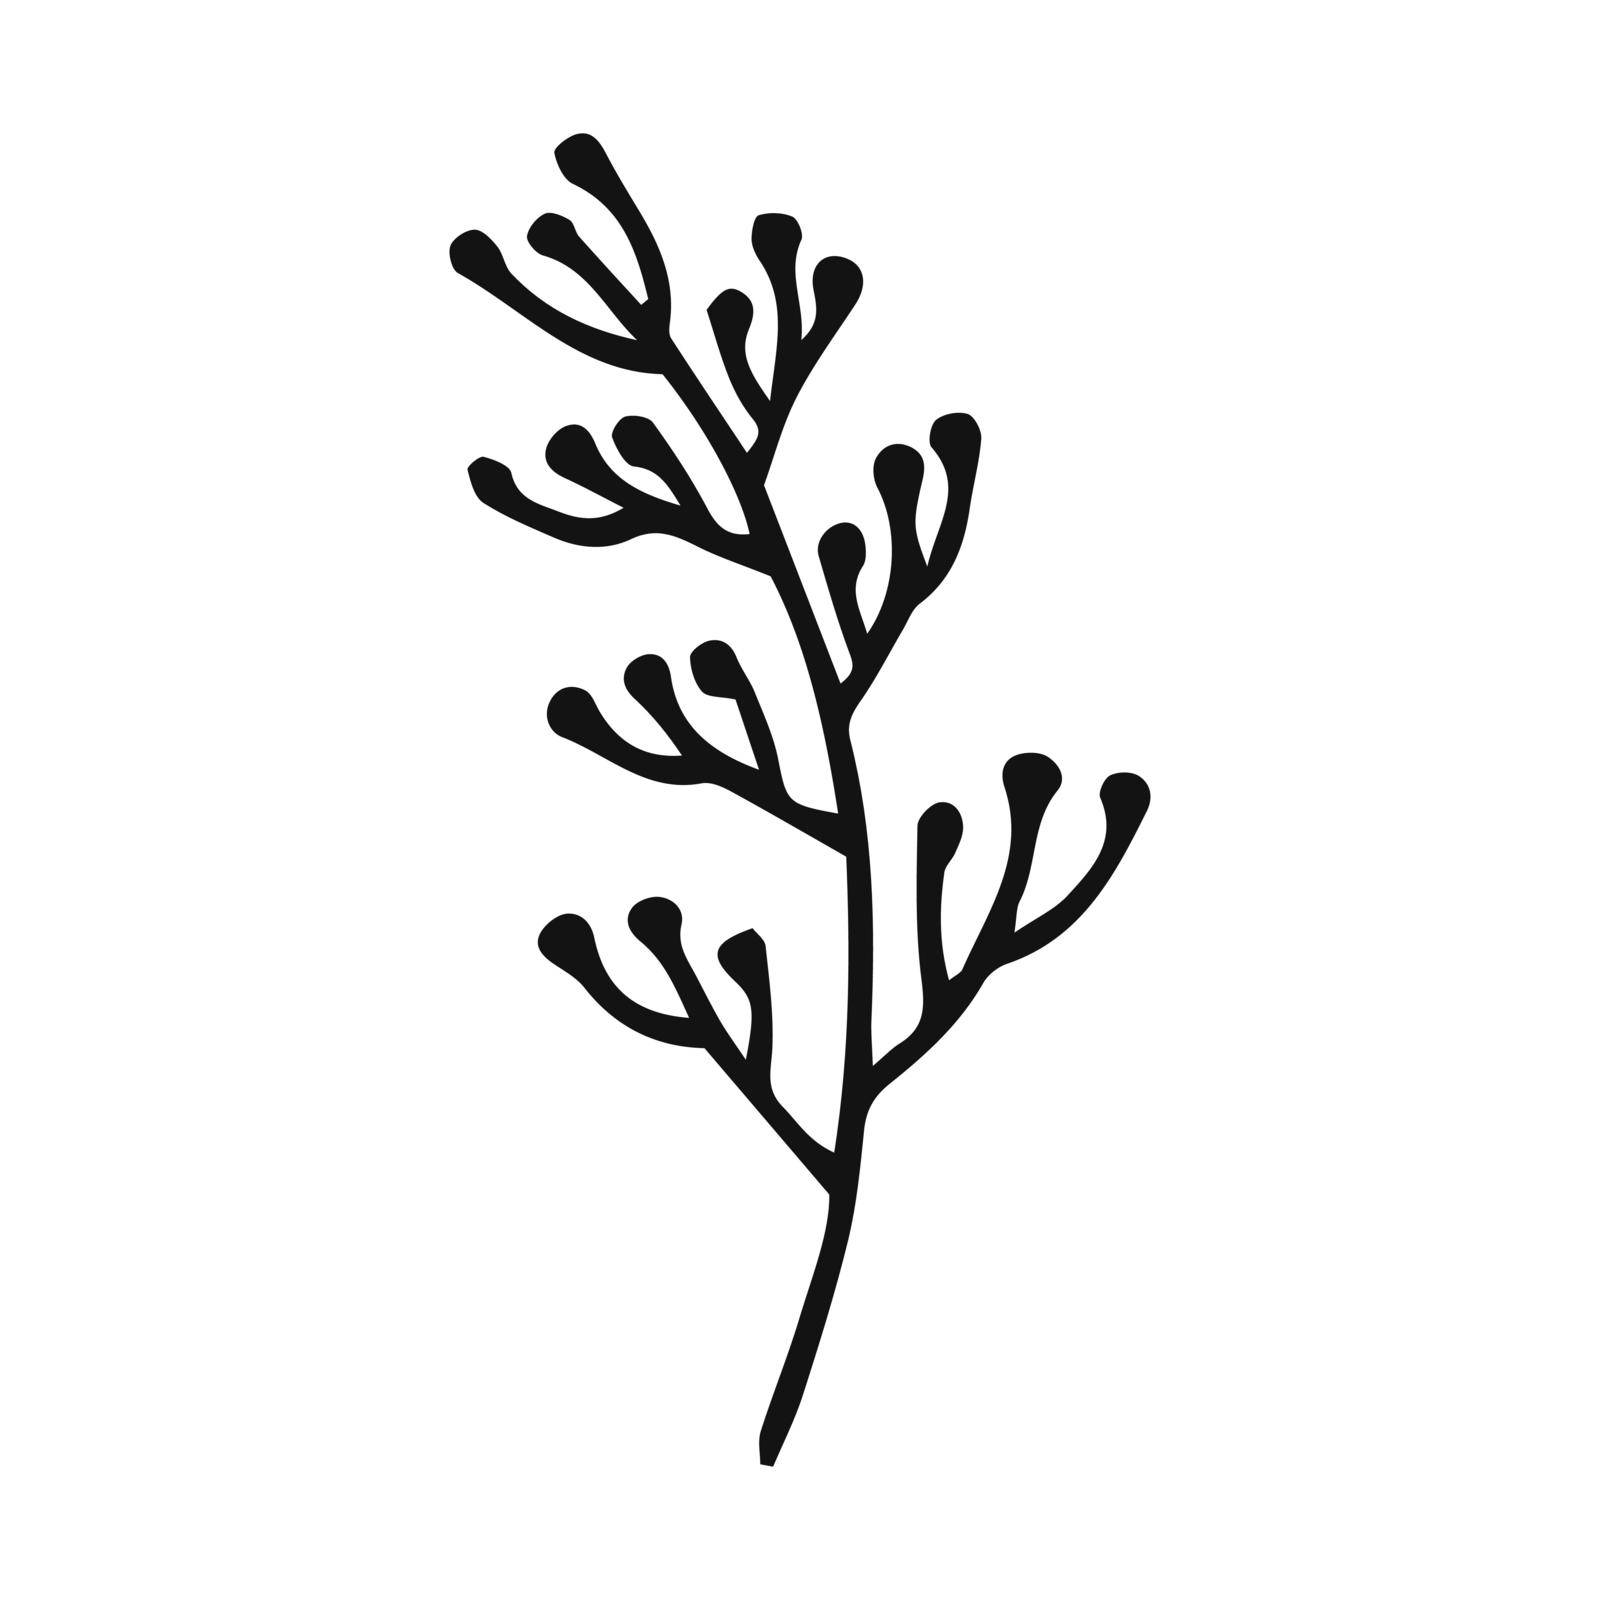 Hand drawn plants outline. Floral and leave element. Line art style isolated on white background. by DaryaKuznetsova